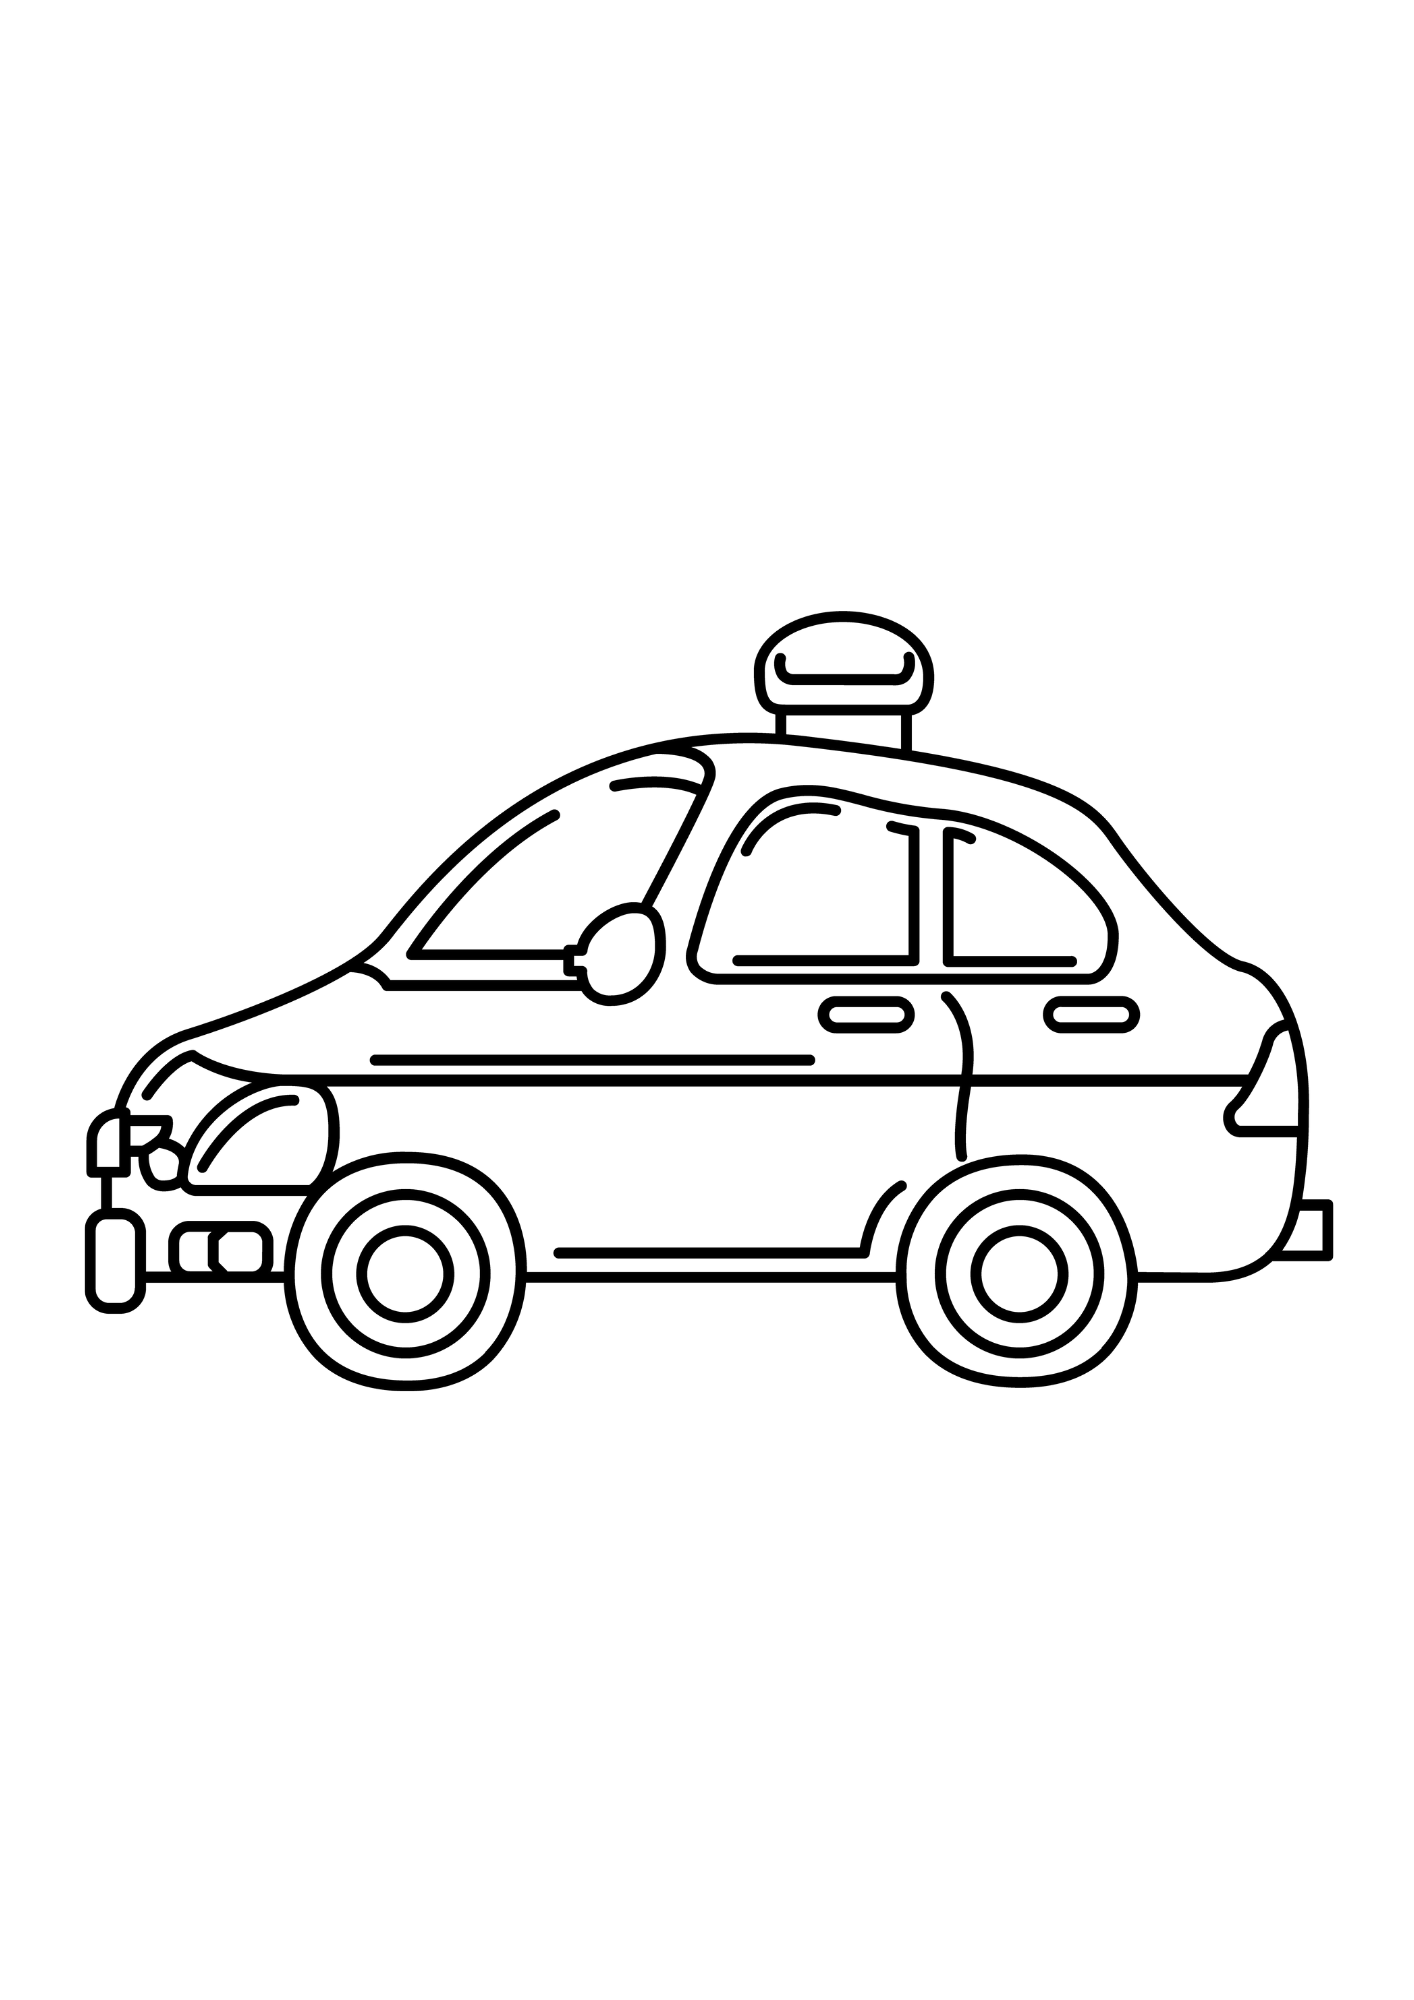 Police Car Printable For Kids Coloring Pages